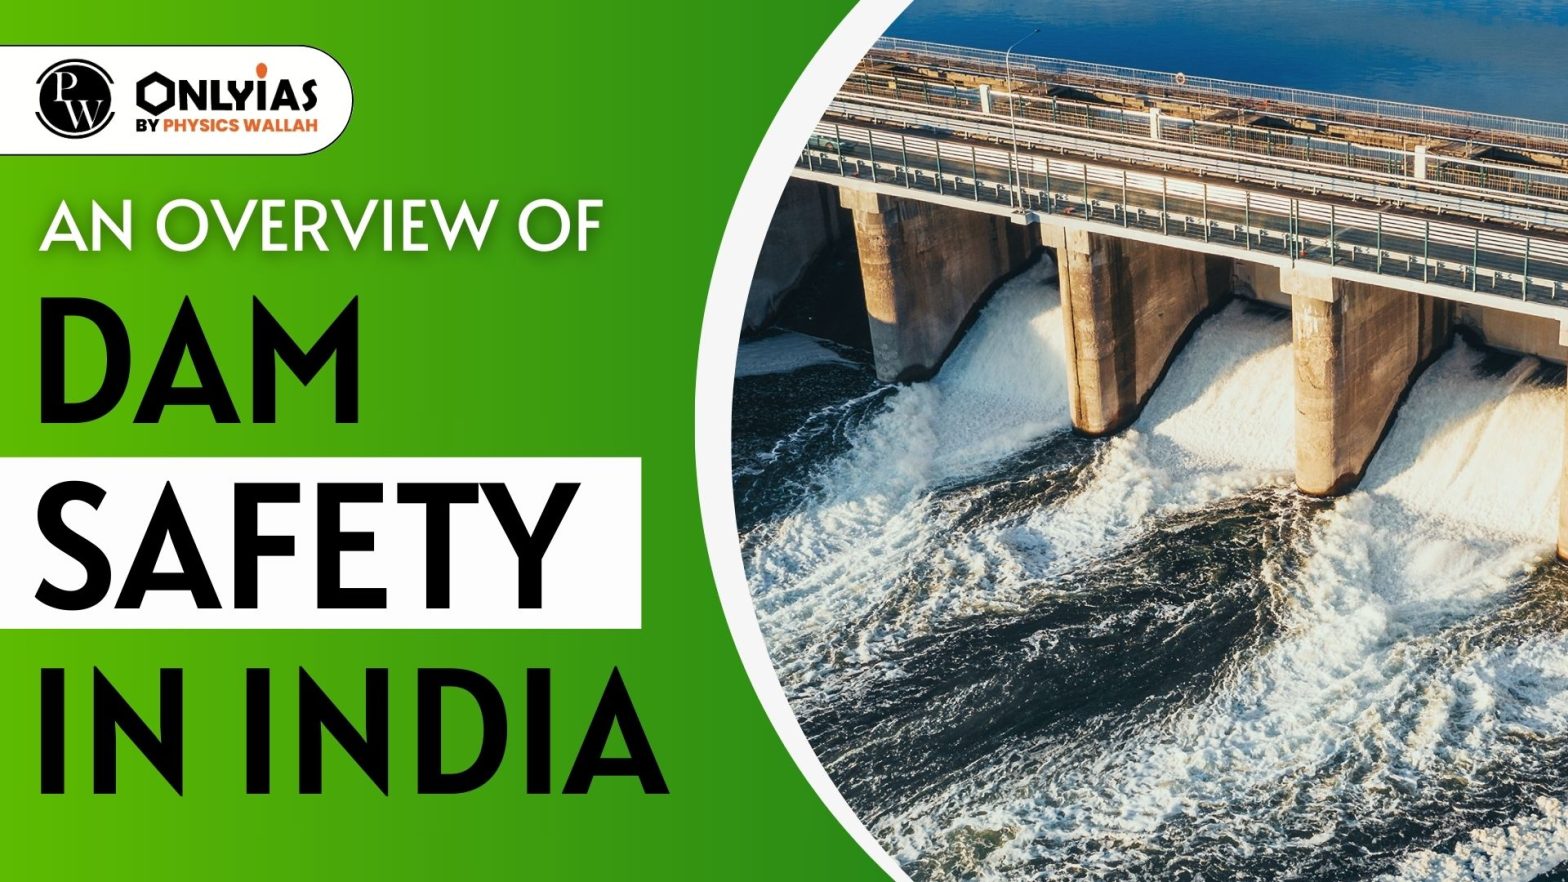 An Overview of Dam Safety in India